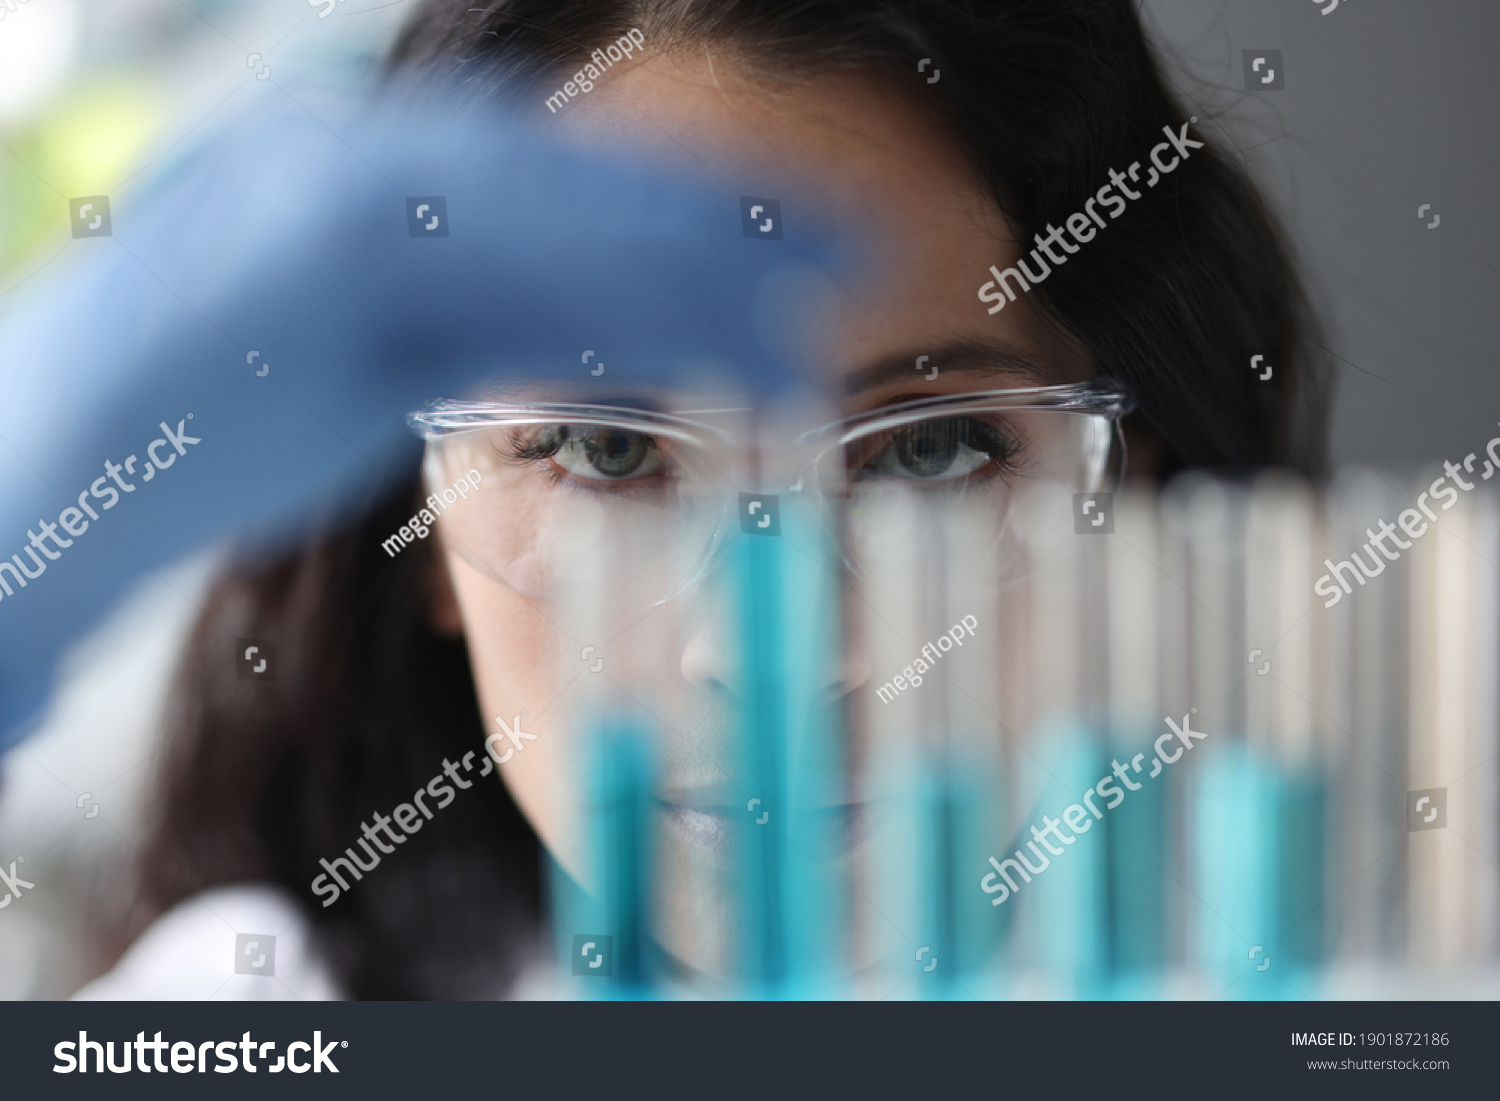 Portrait of woman in glasses who looks at test tubes with liquid. Research and development concept #1901872186